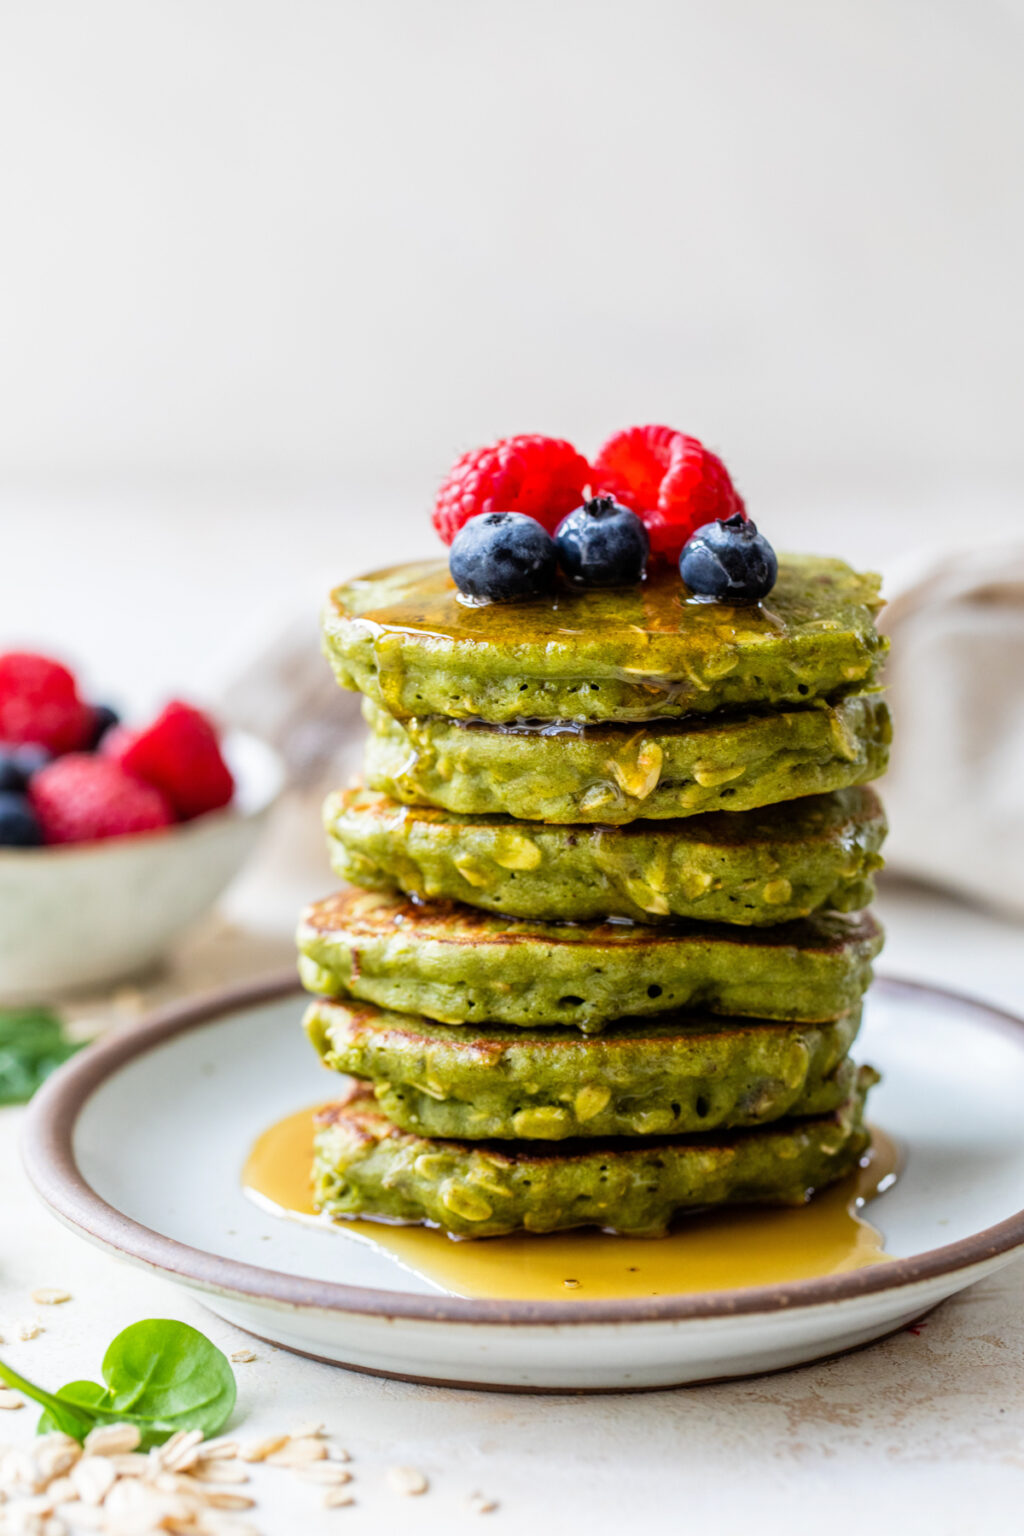 15-Minute Healthy Spinach Pancakes with Oats « Clean & Delicious